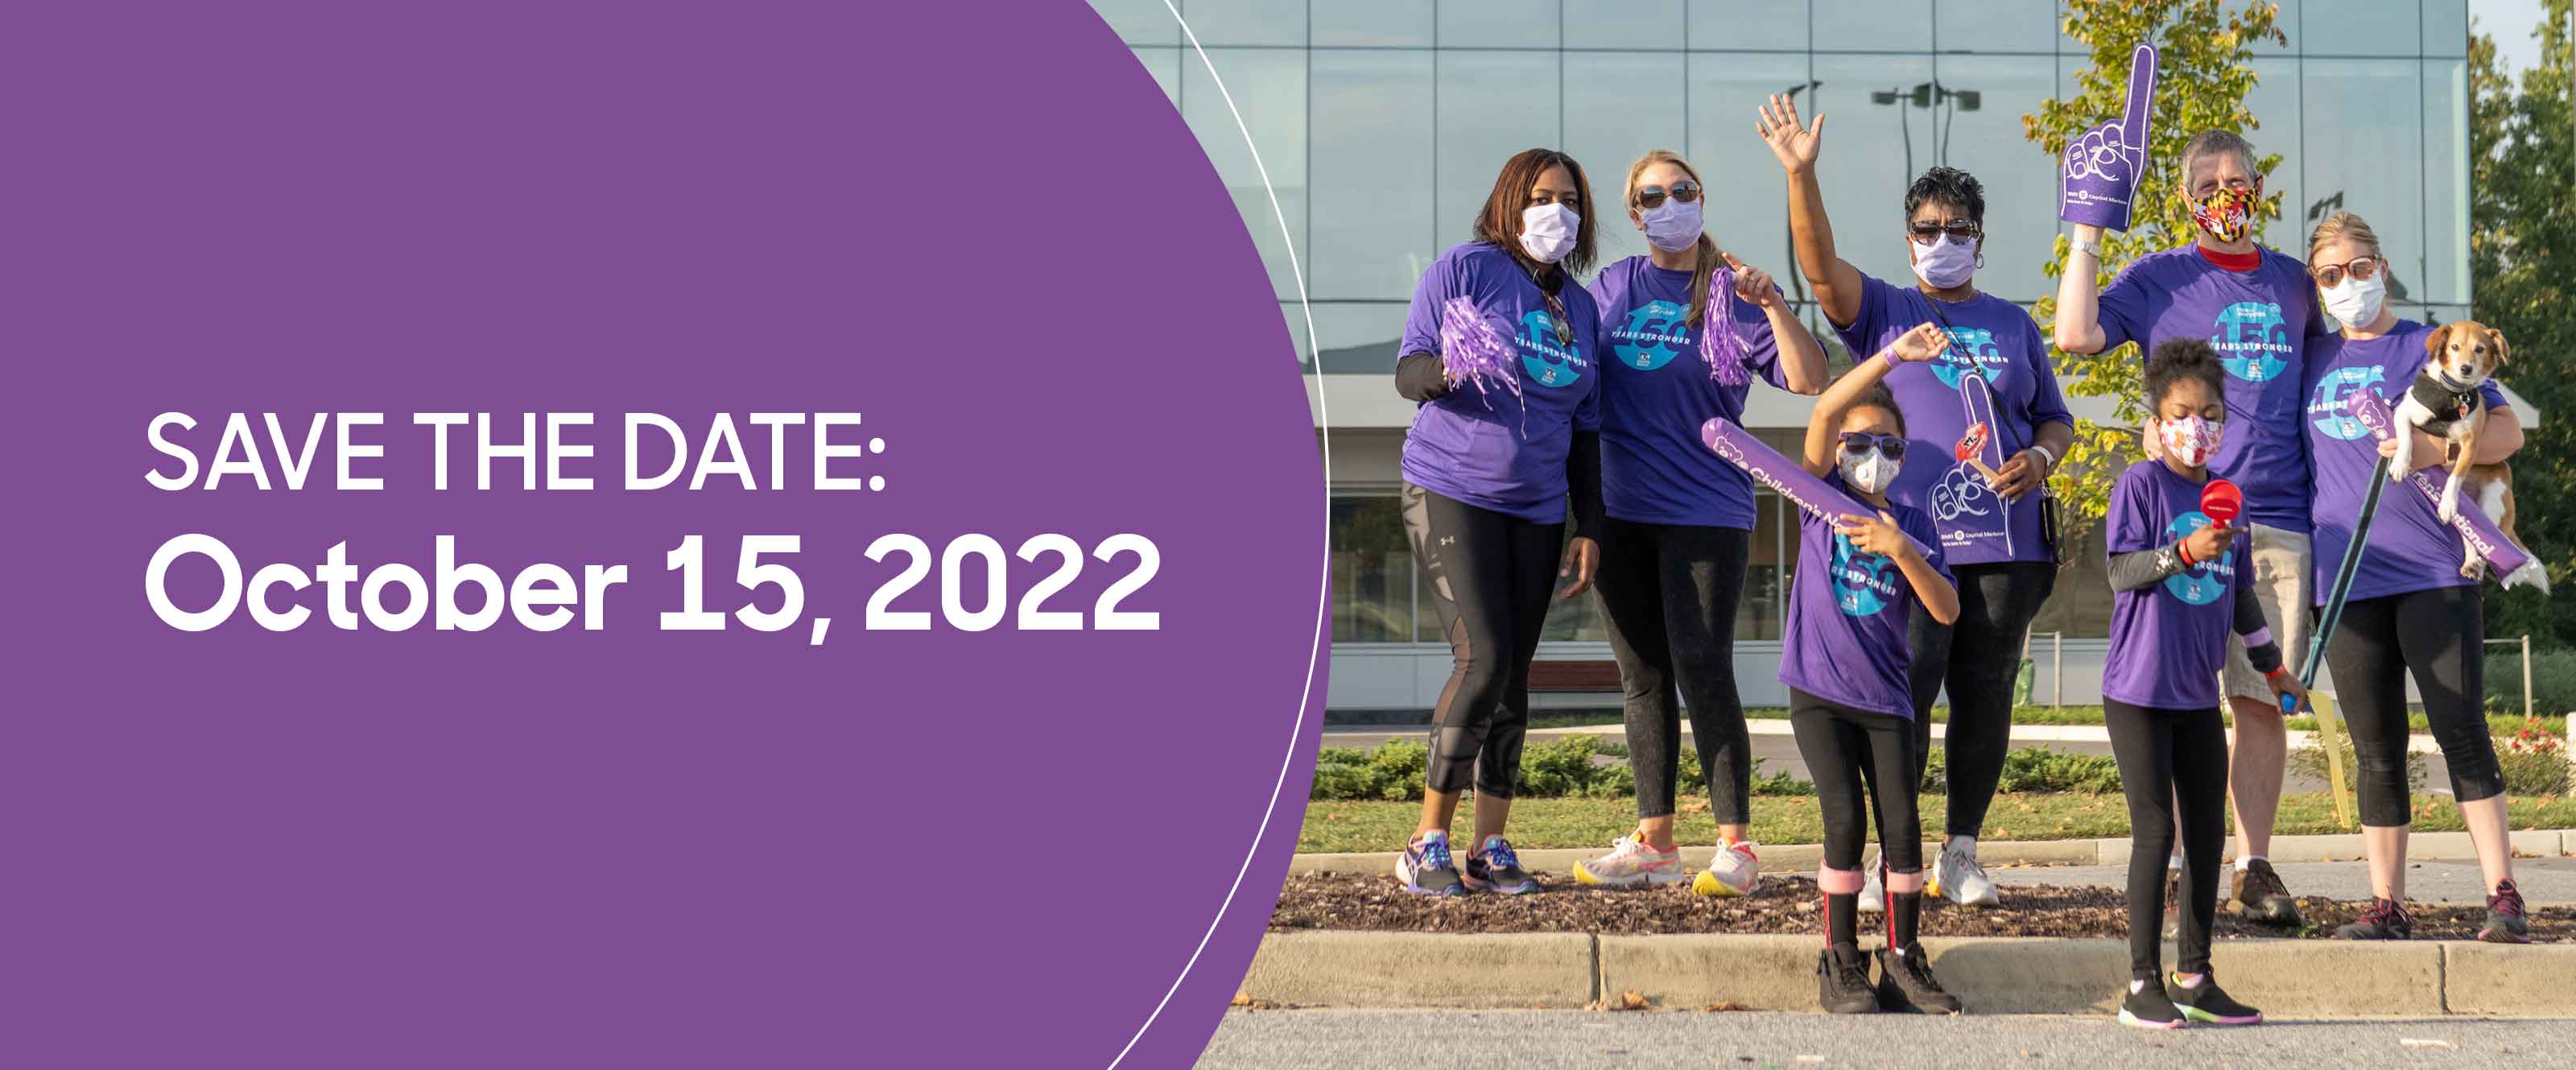 Virtual Race for Every Child 150th Birthday Edition - SAVE THE DATE - Saturday, October 16, 2021 - A 5K walk/run at Freedom Plaza, Washington D.C. or wherever you are